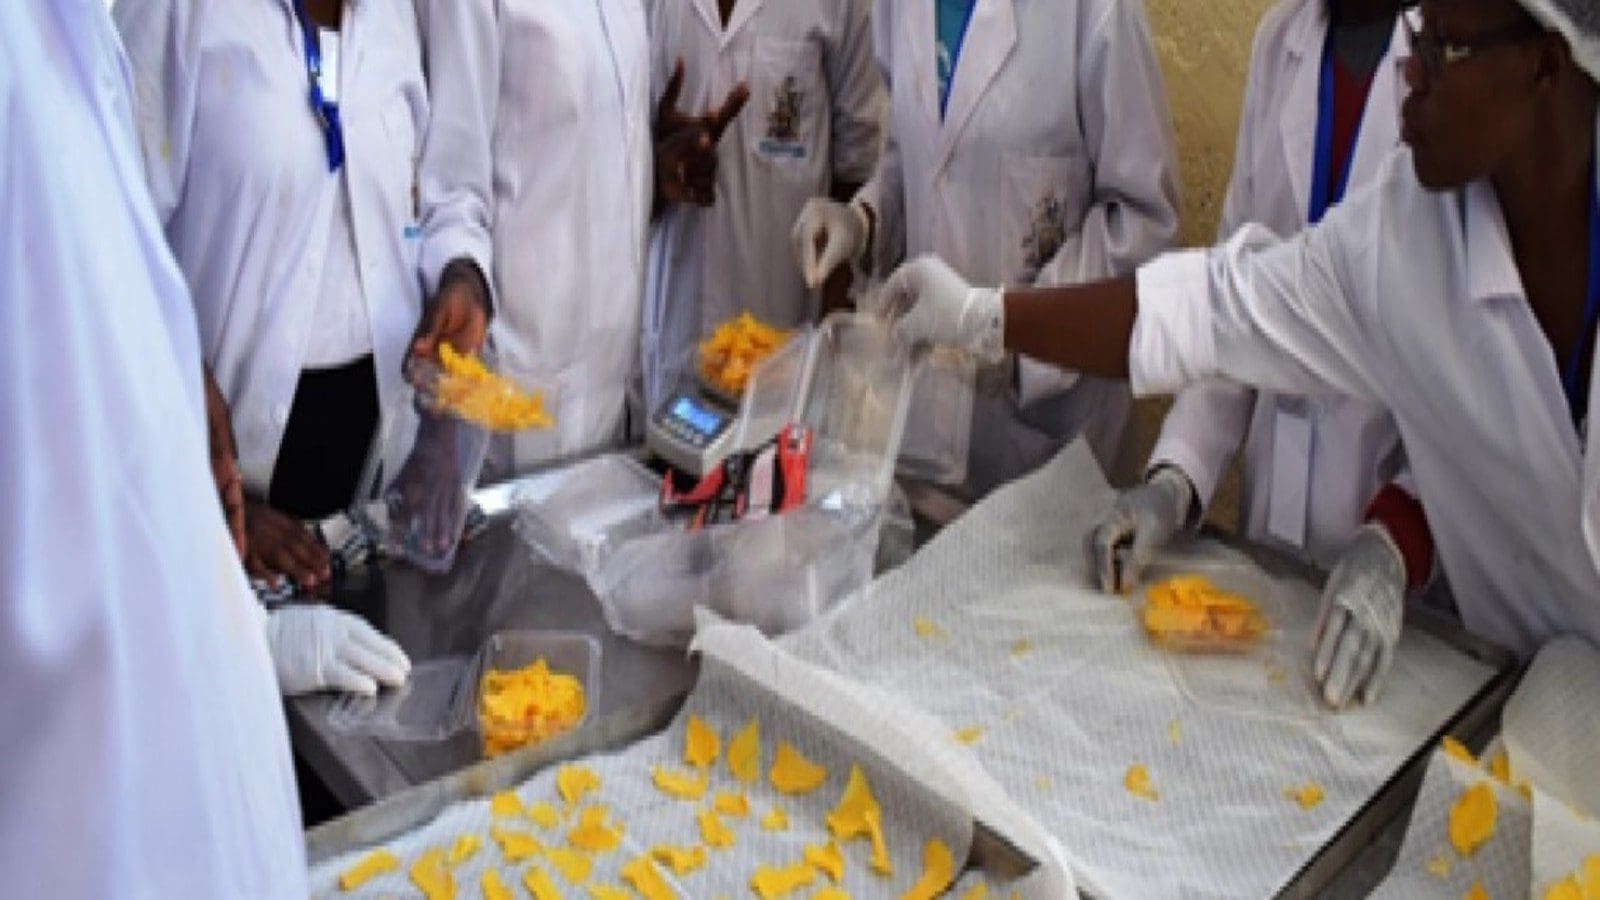 World Food Programme funds food safety mini-laboratories construction in Kenya’s Marsabit county